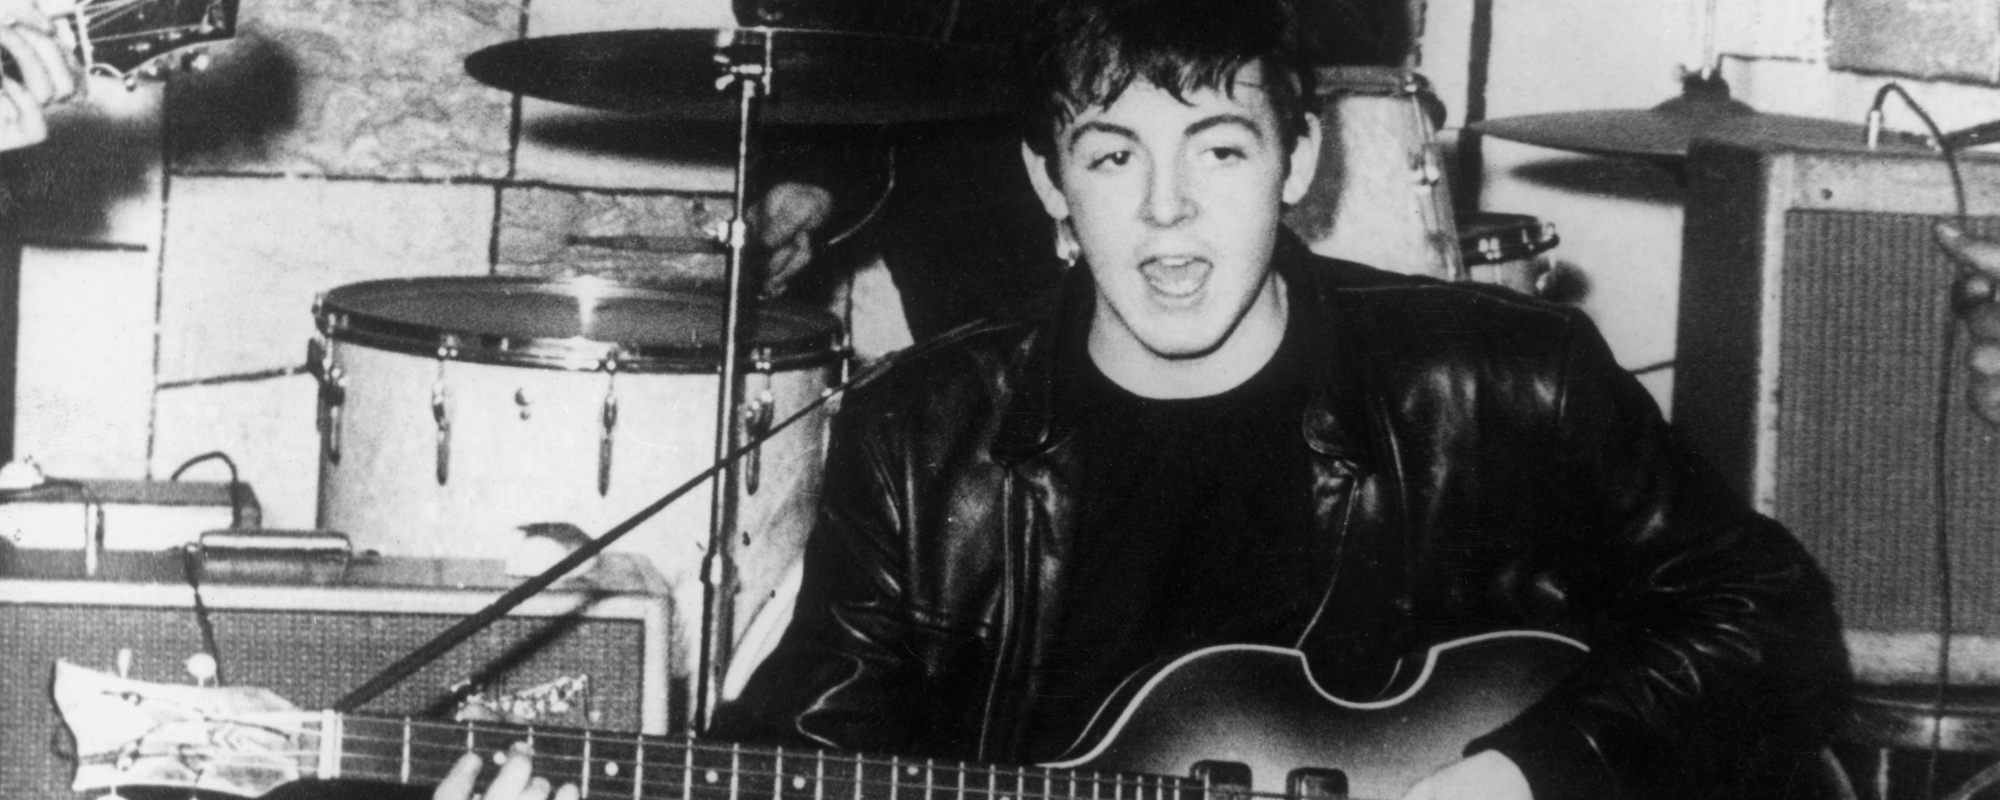 Paul McCartney Talks the Famous Beatles Ballad That Started as a Song He’d Play to Impress People at Parties